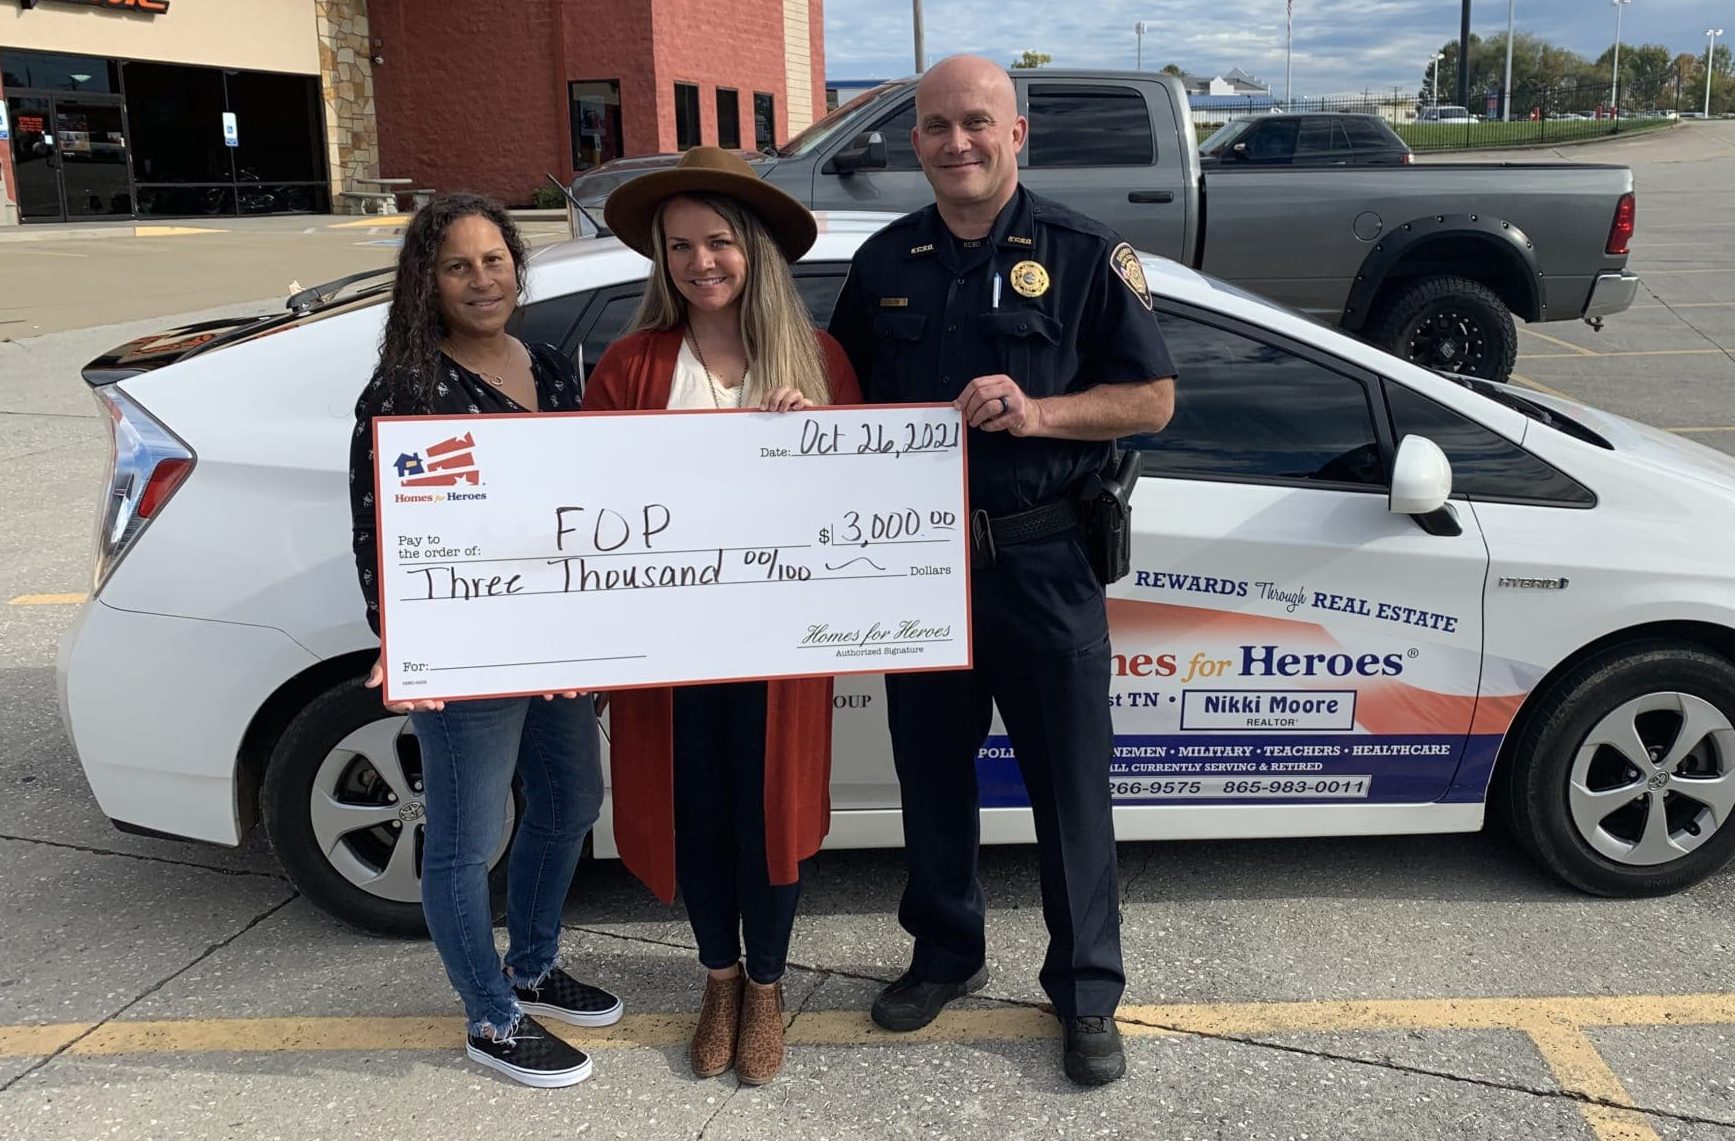 Real Estate Specialist Nikki Moore presents a giant check for $3,000 to Knoxville FOP President Keith Lyon from the Homes for Heroes Foundation in honor of 50,000 heroes served